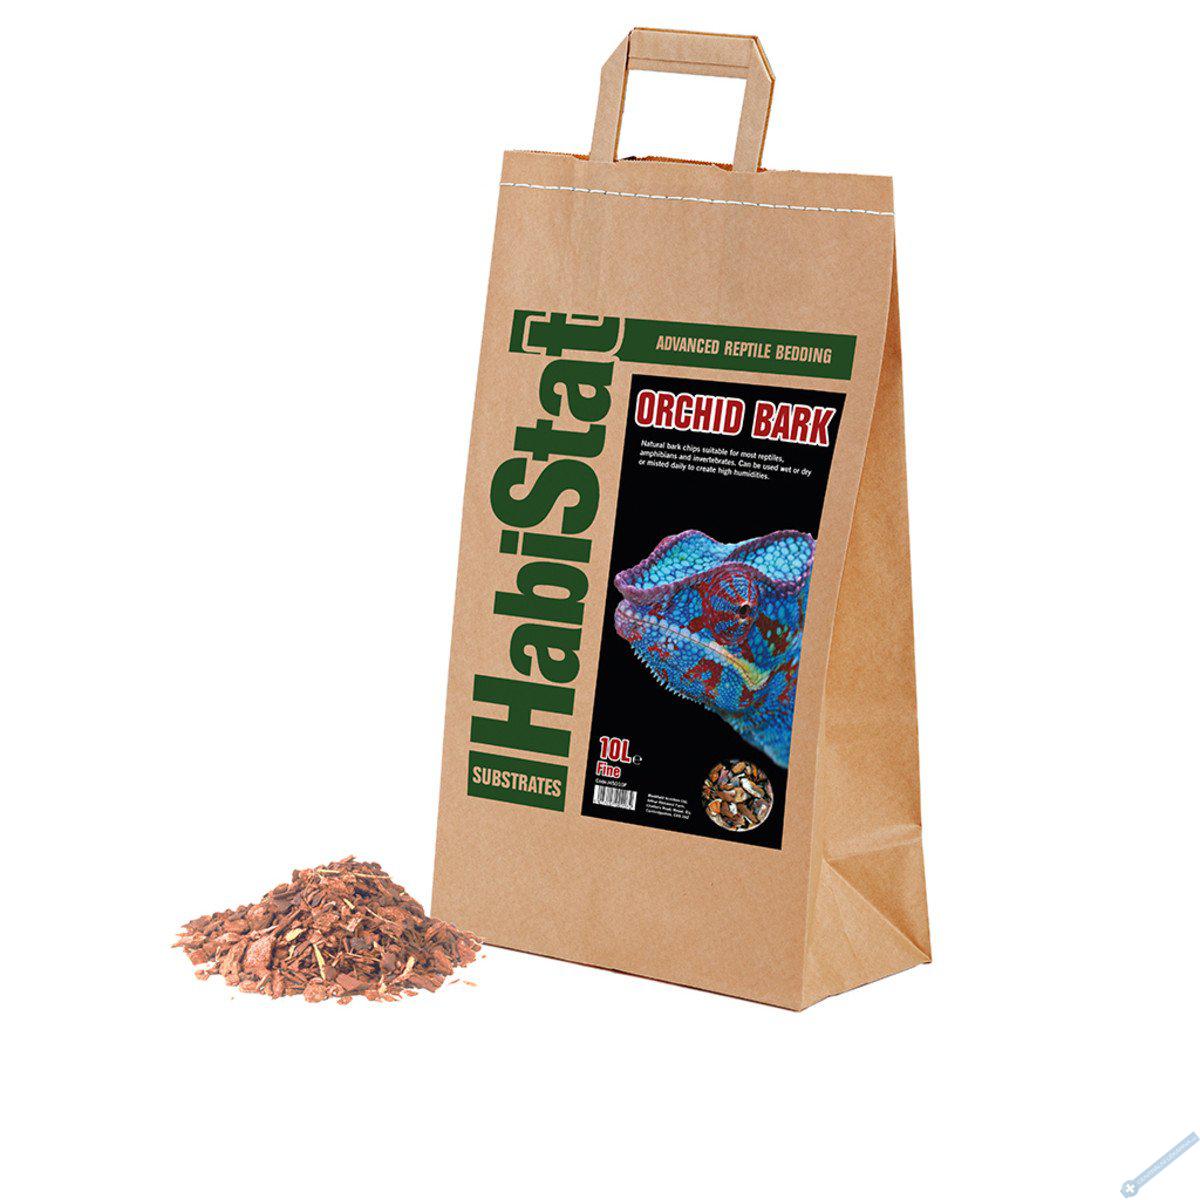 HabiStat Orchid Bark Substrate jemn 10l